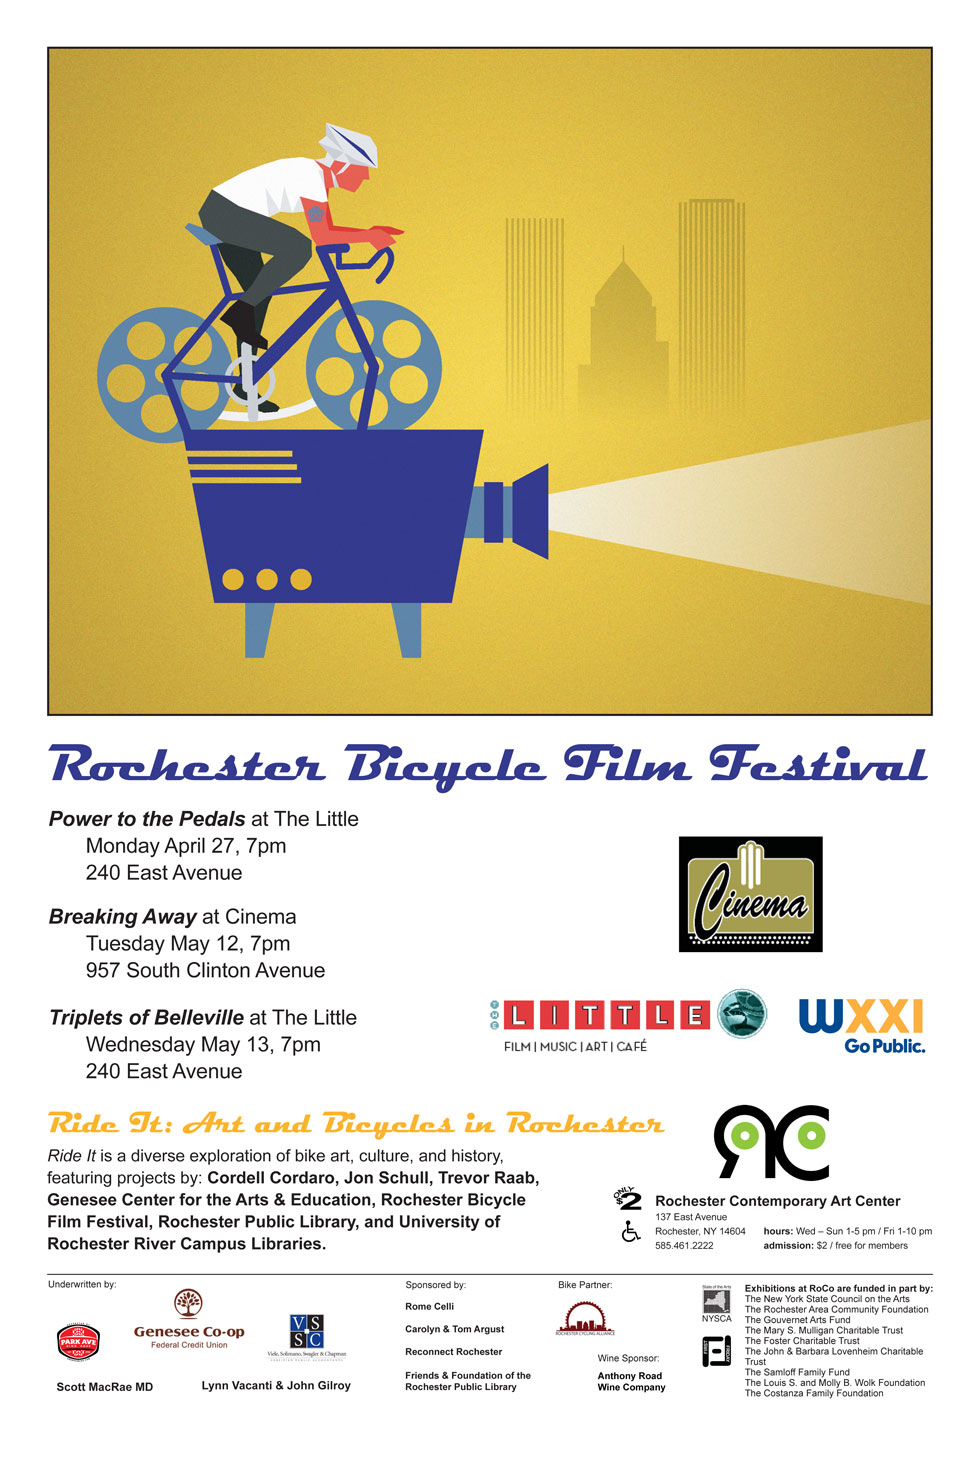 On Monday April 27 at 7pm, Rochester Bicycle Film Festival will present its first of three films, Power to the Pedals.